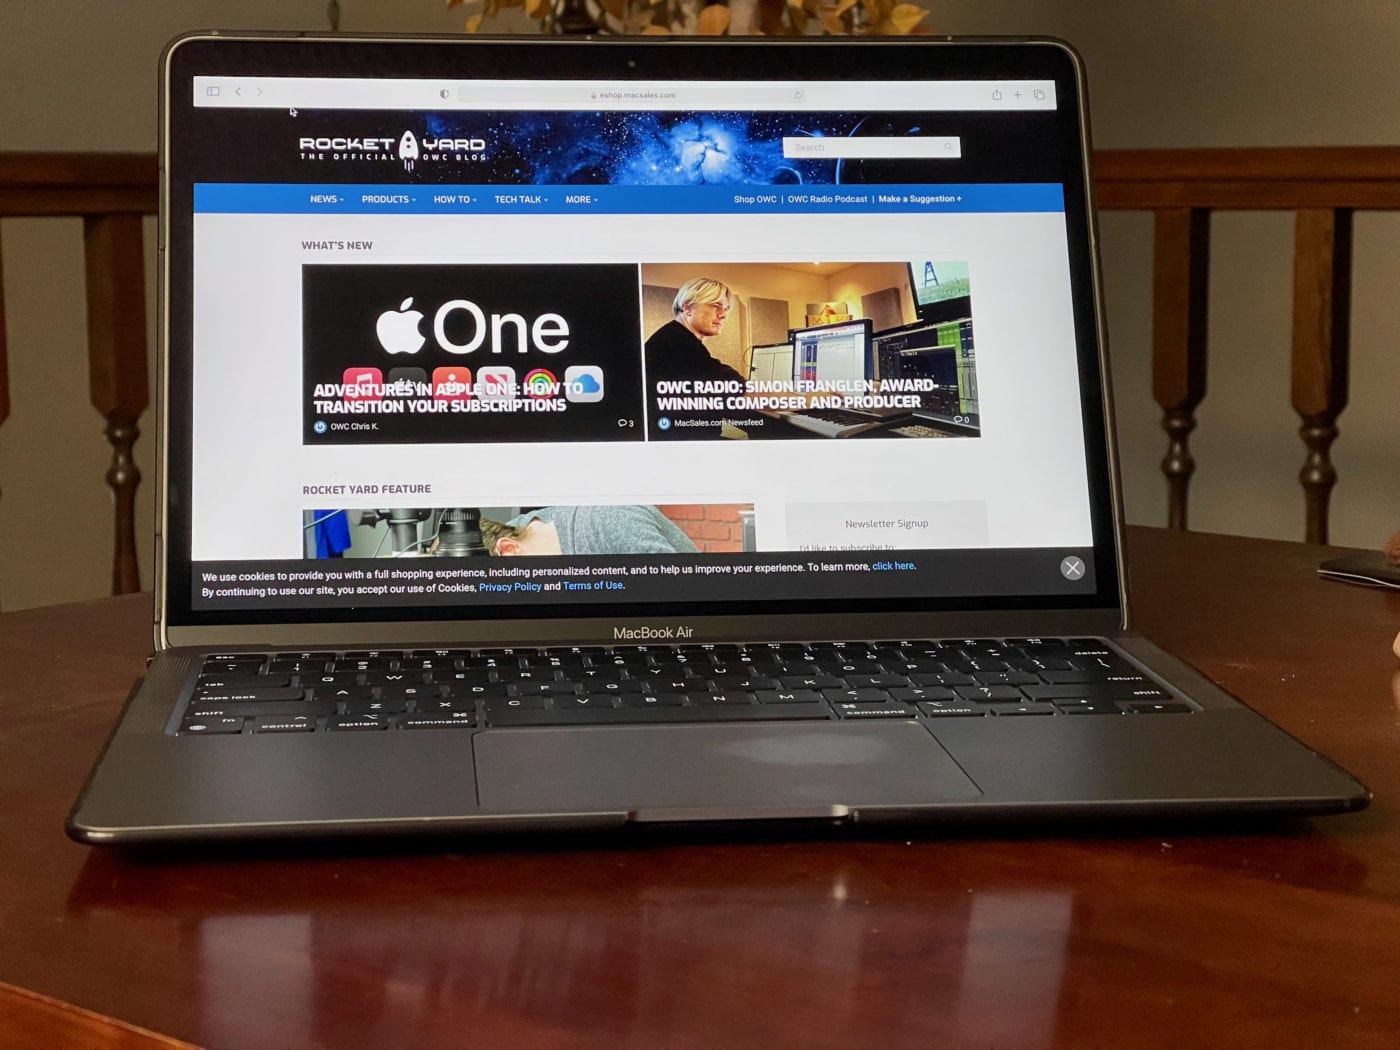 M1 MacBook Air: Benchmarks and Hands-On Review